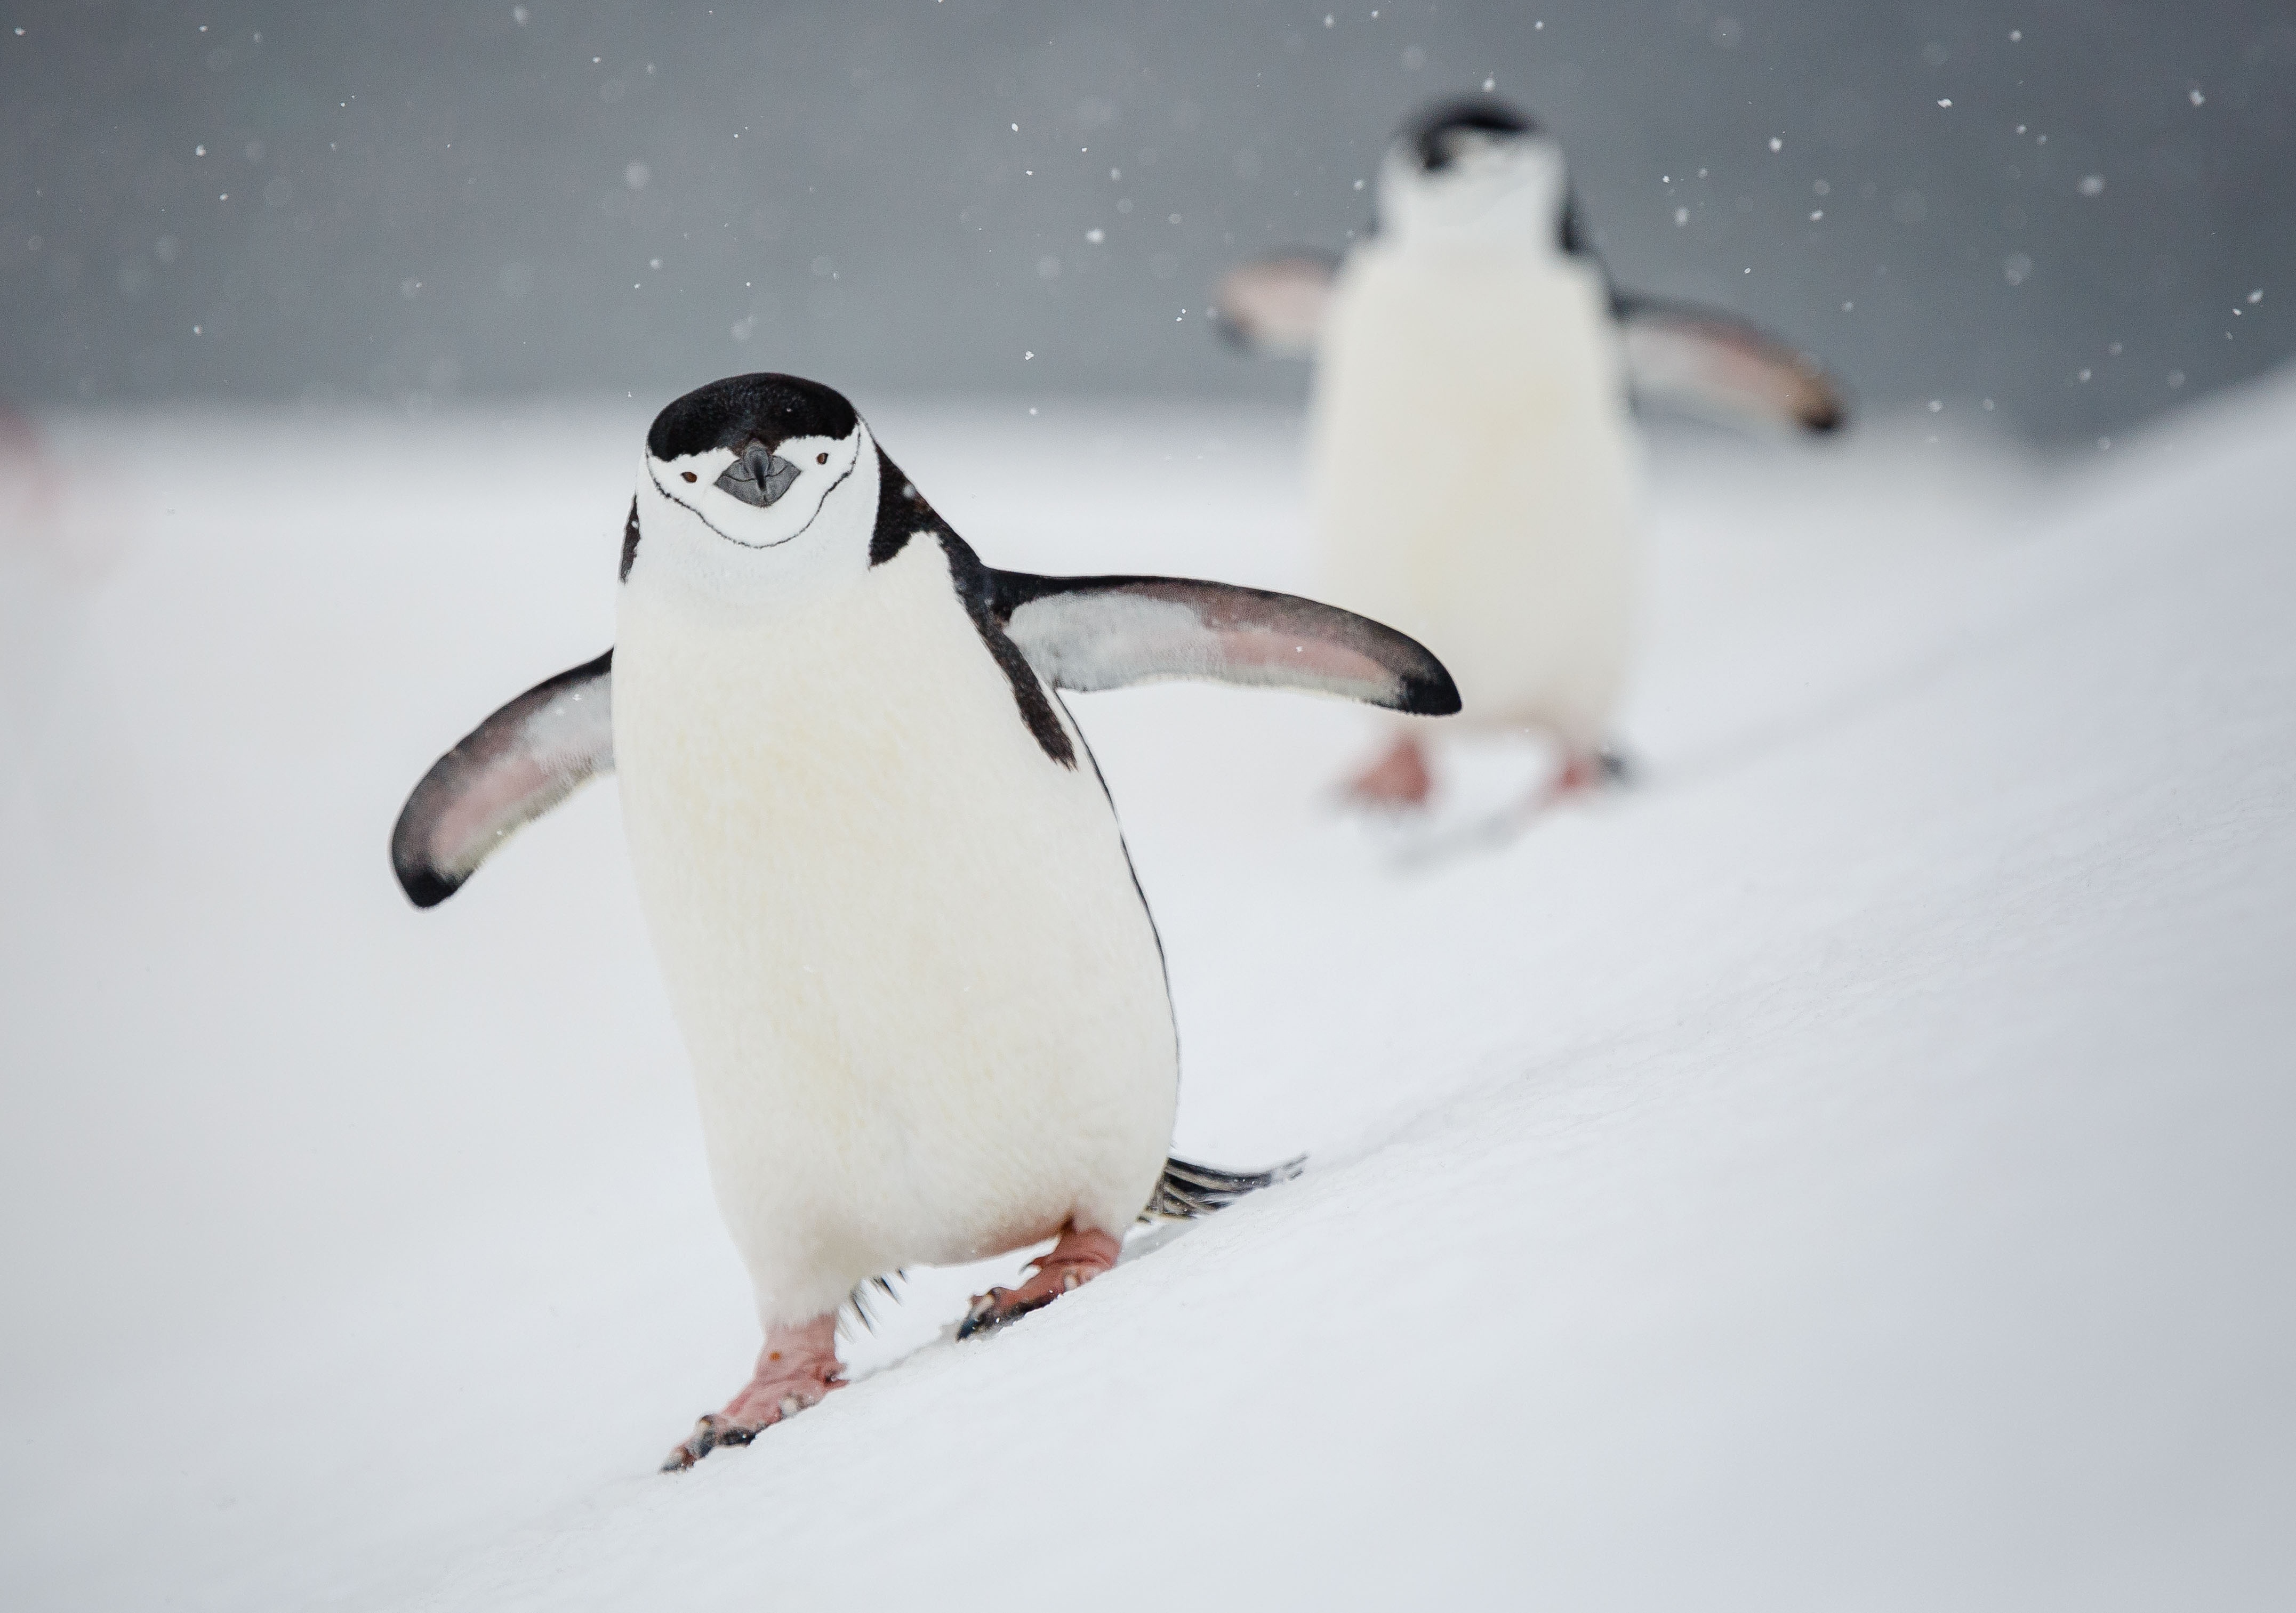 Chinstraps are one of the numerous species of penguins guests will see in abundance during polar voyages to Antarctica with Quark Expeditions